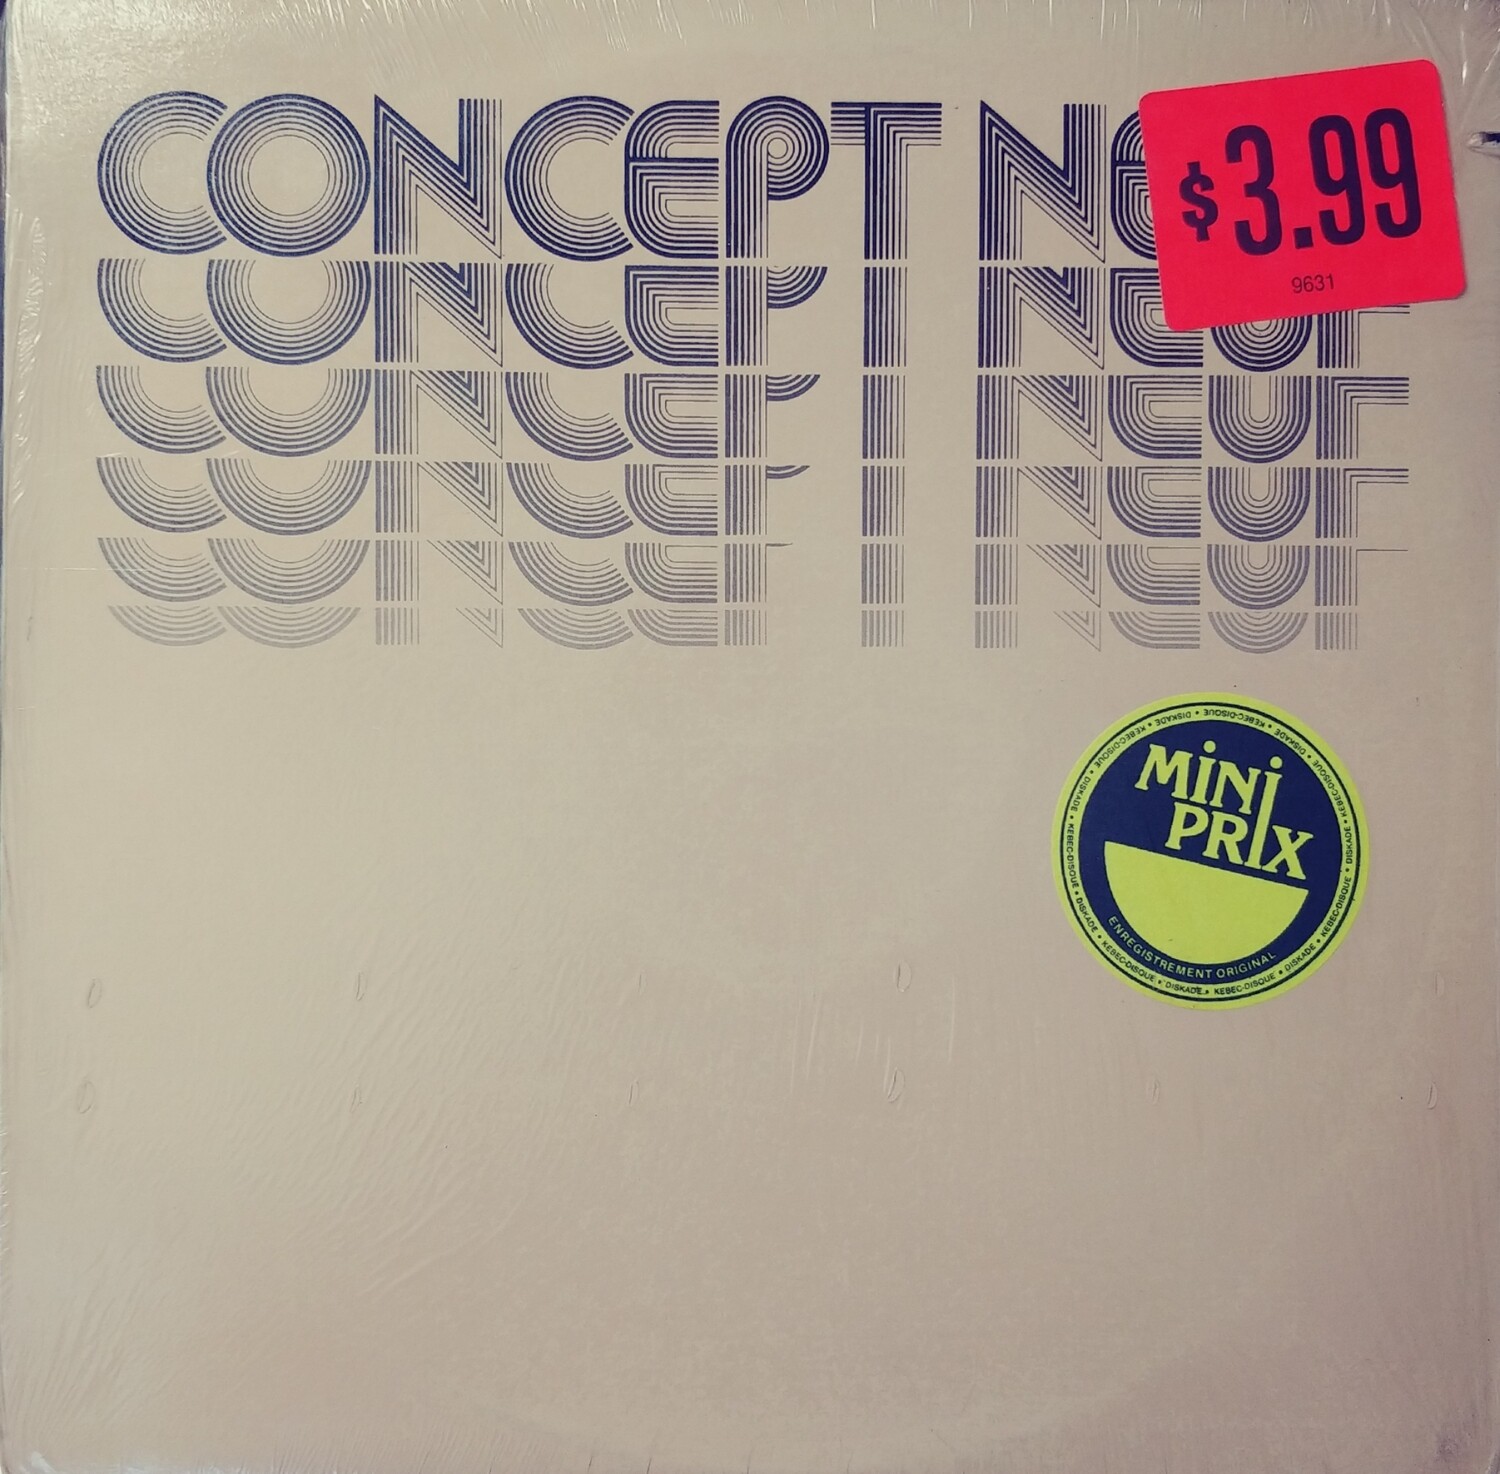 Conception Neuf - Conception Neuf